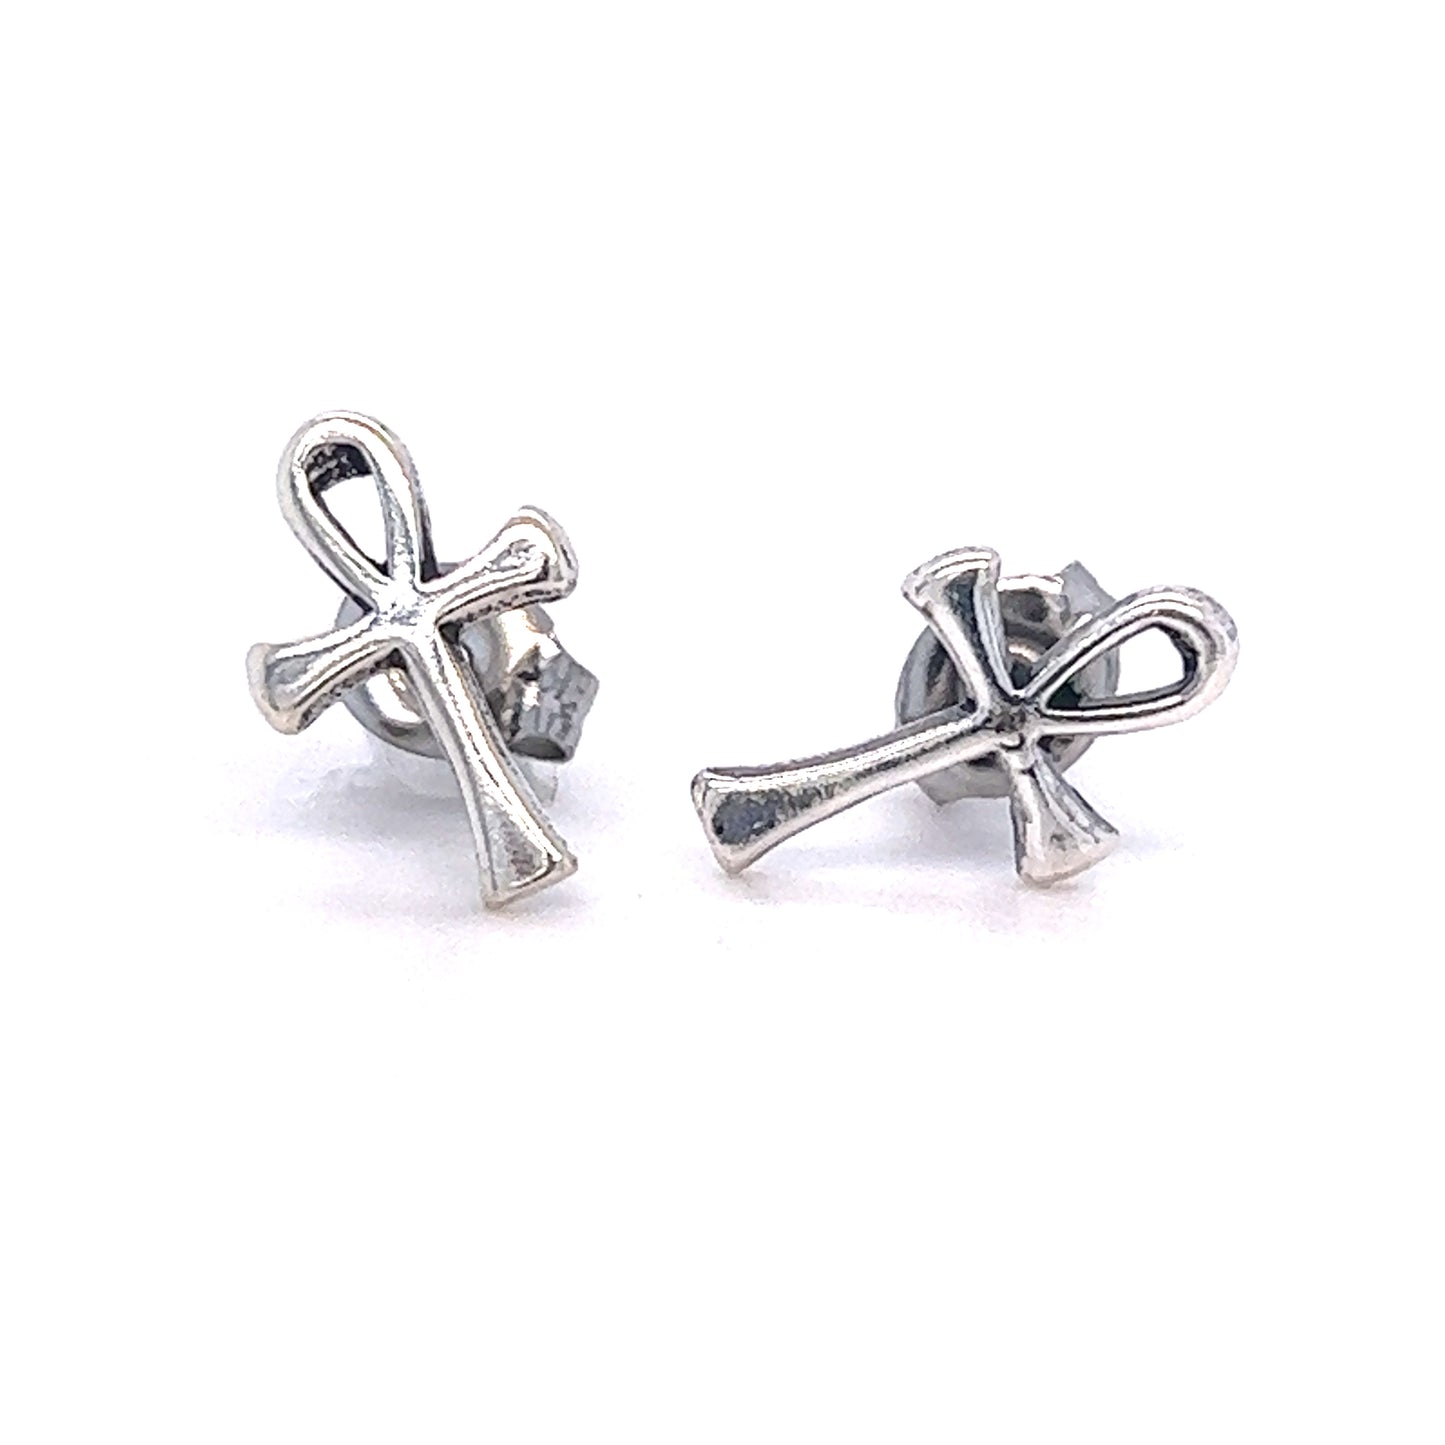 Super Silver's Simple Ankh Studs, featuring an occult design, symbolizing eternal life.